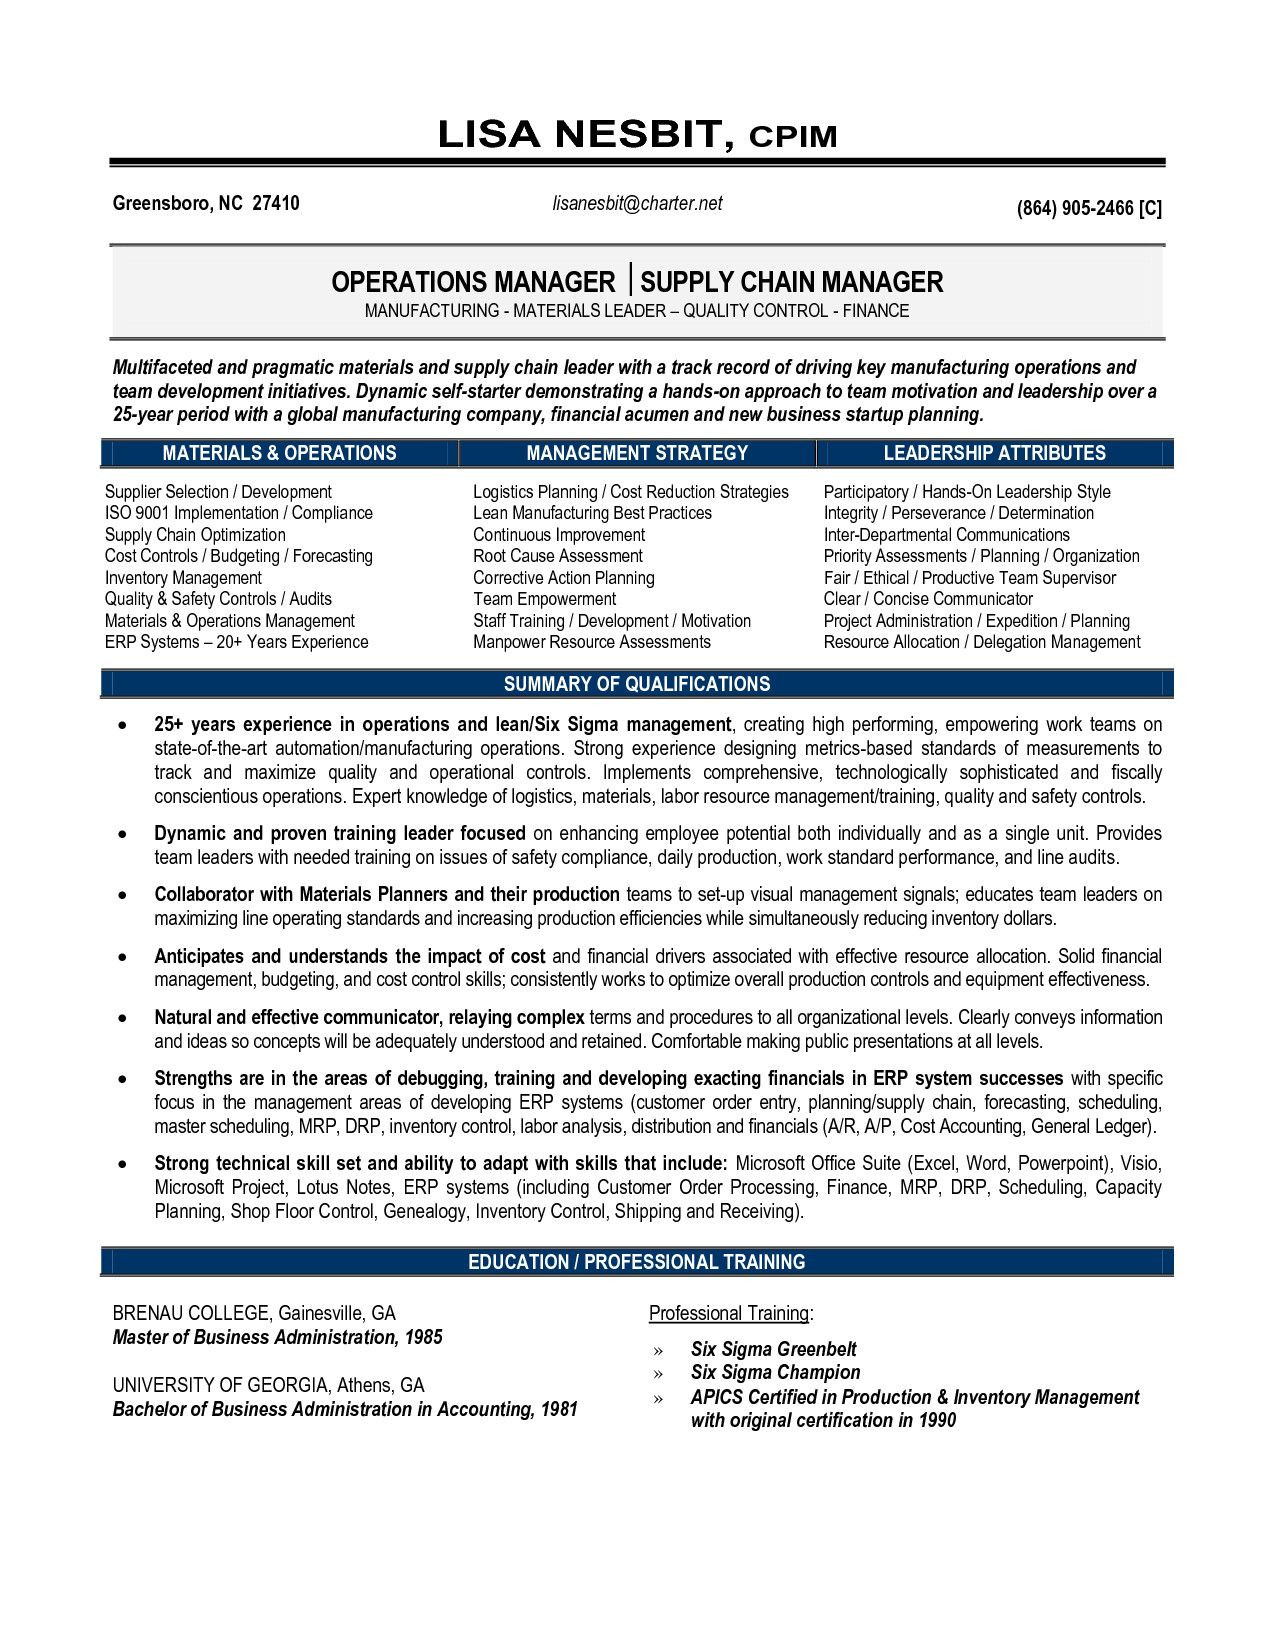 Resume Sample for Supply Chain Management Supply Chain Manager Resume Resume Senior Operations Manager …